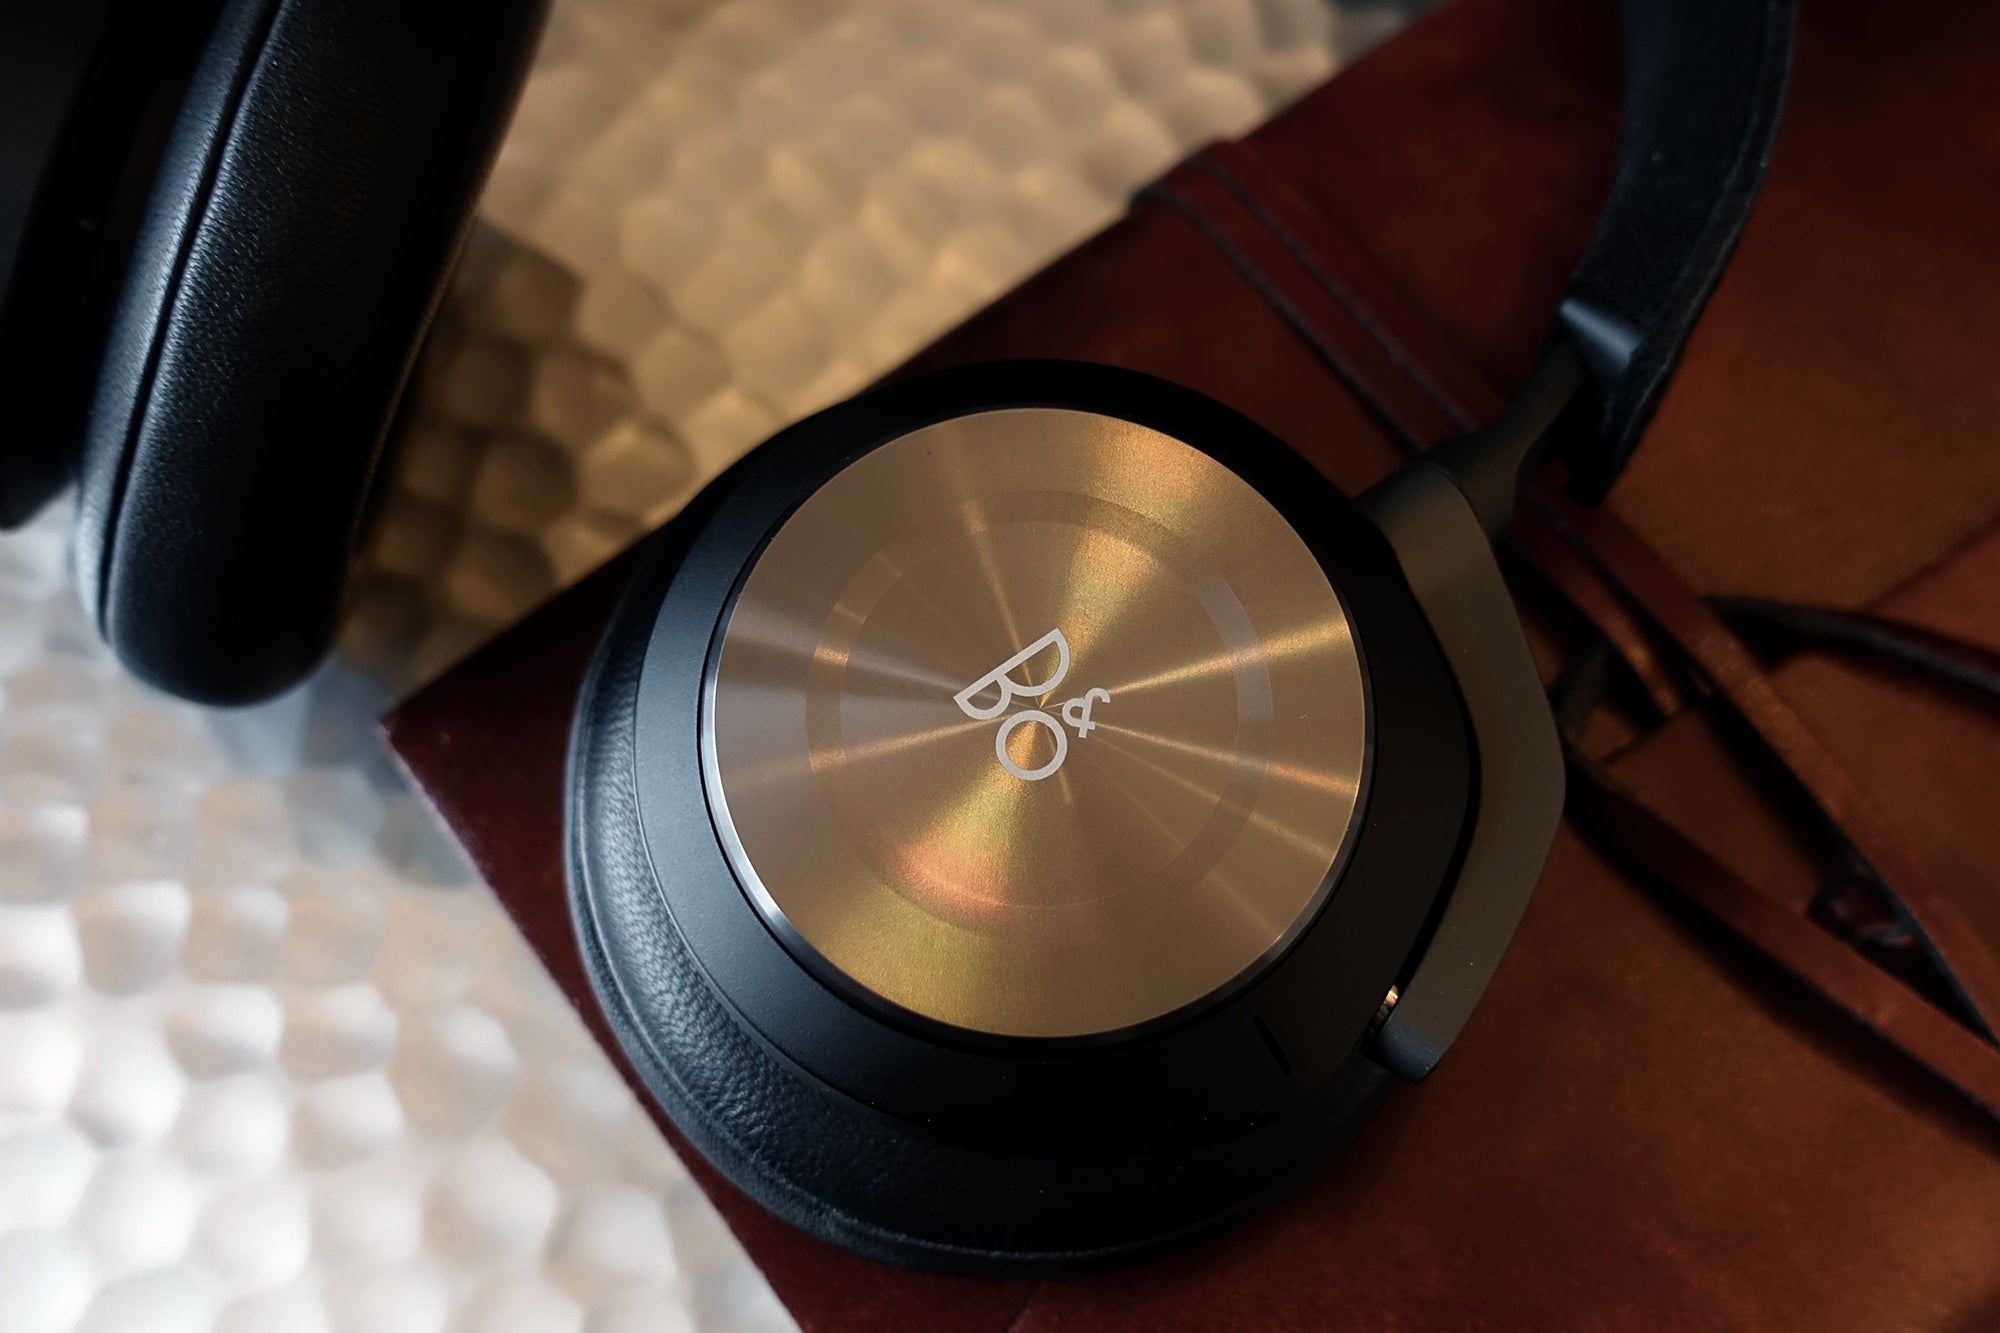 B&O Beoplay H9i: expensive but worthy wireless headphones